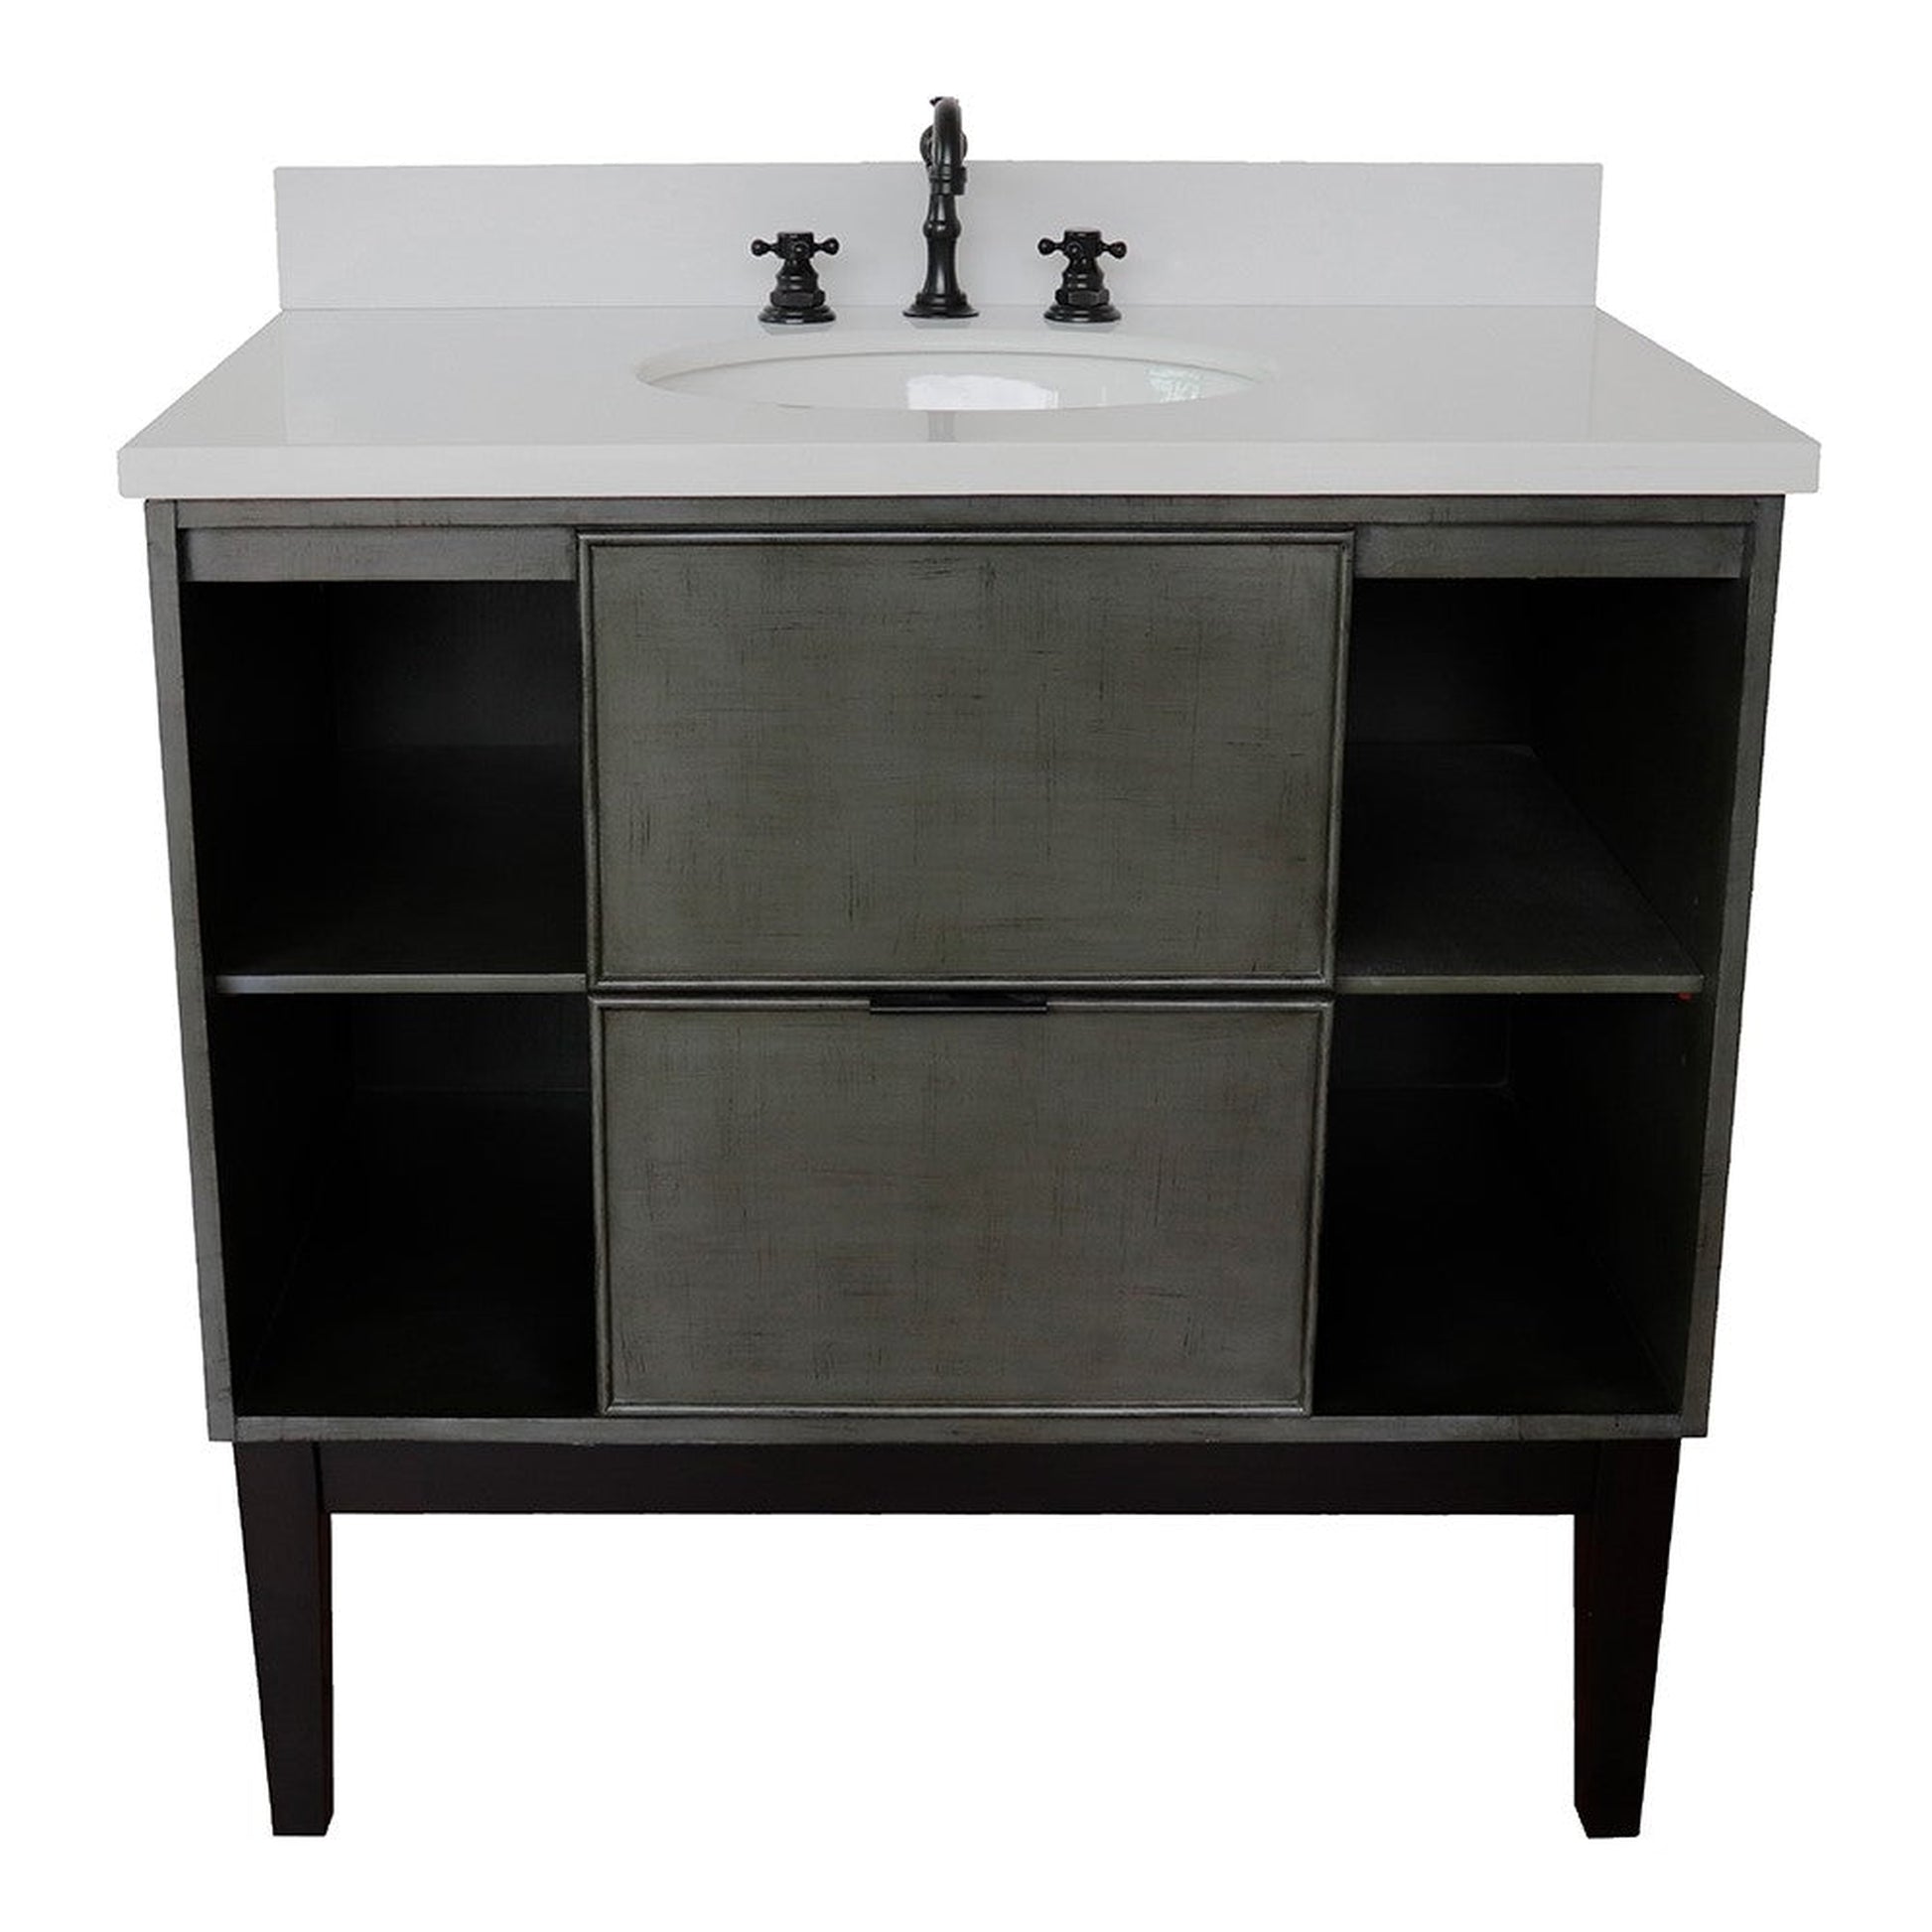 Bellaterra Home Paris Exposed 37" 1-Drawer Linen Gray Freestanding Vanity Set With Ceramic Undermount Oval Sink and White Quartz Top